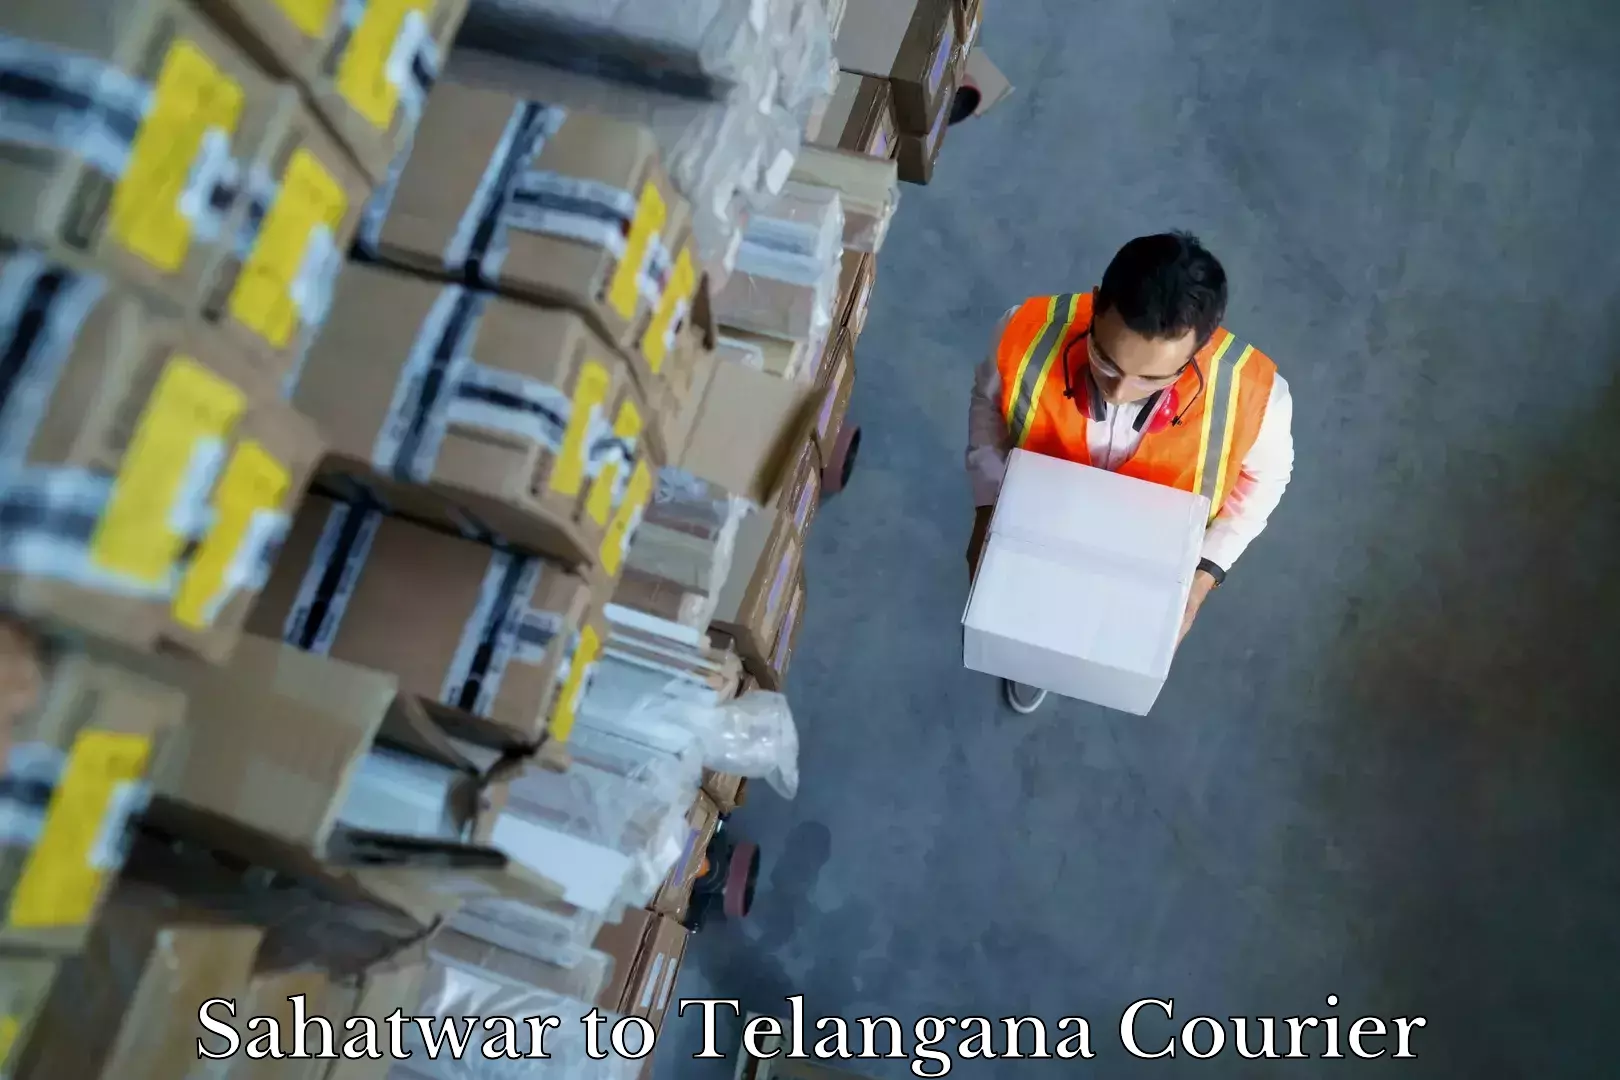 Moving and handling services in Sahatwar to Telangana